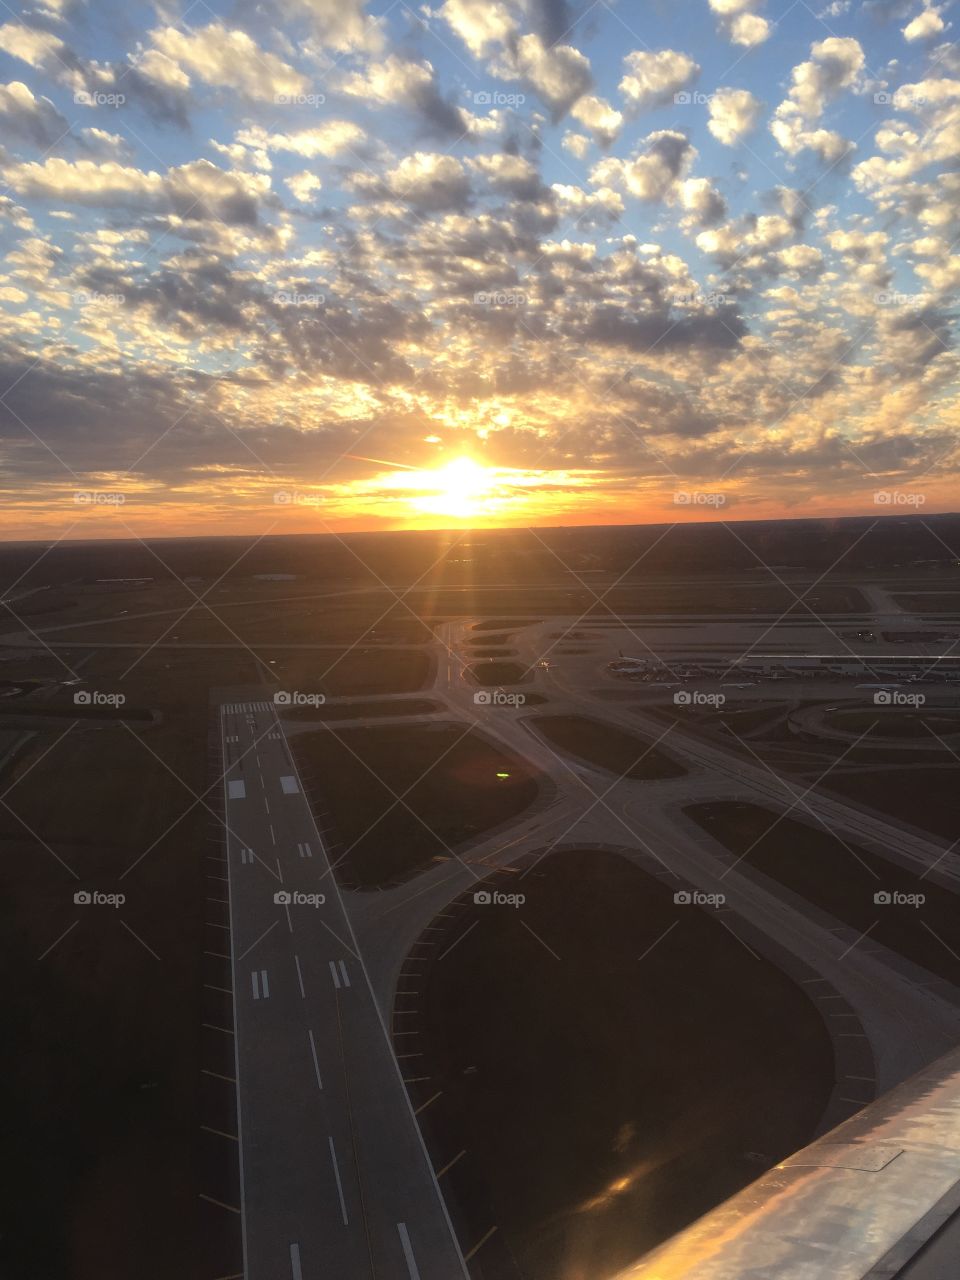 Another Day Ends Over the Runway